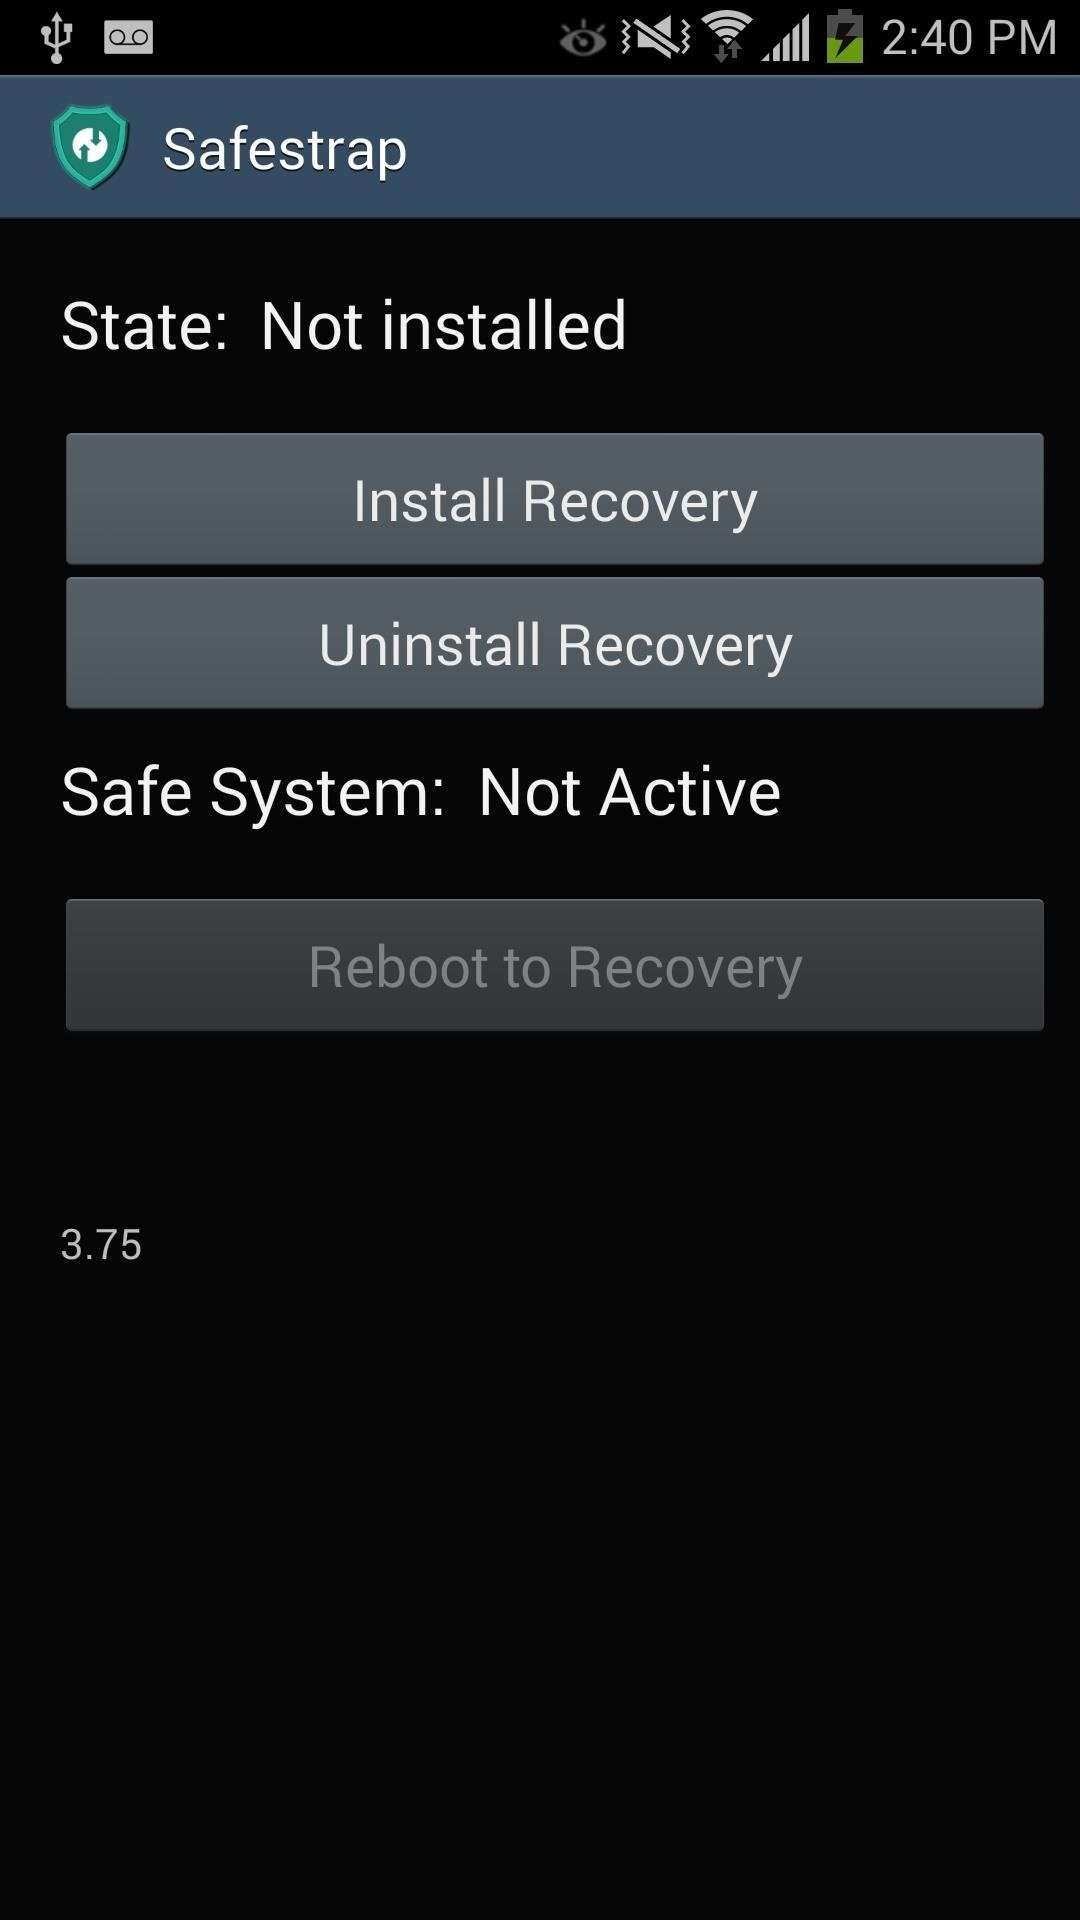 How to Install a Custom Recovery on Your Bootloader-Locked Galaxy Note 3 (AT&T or Verizon)